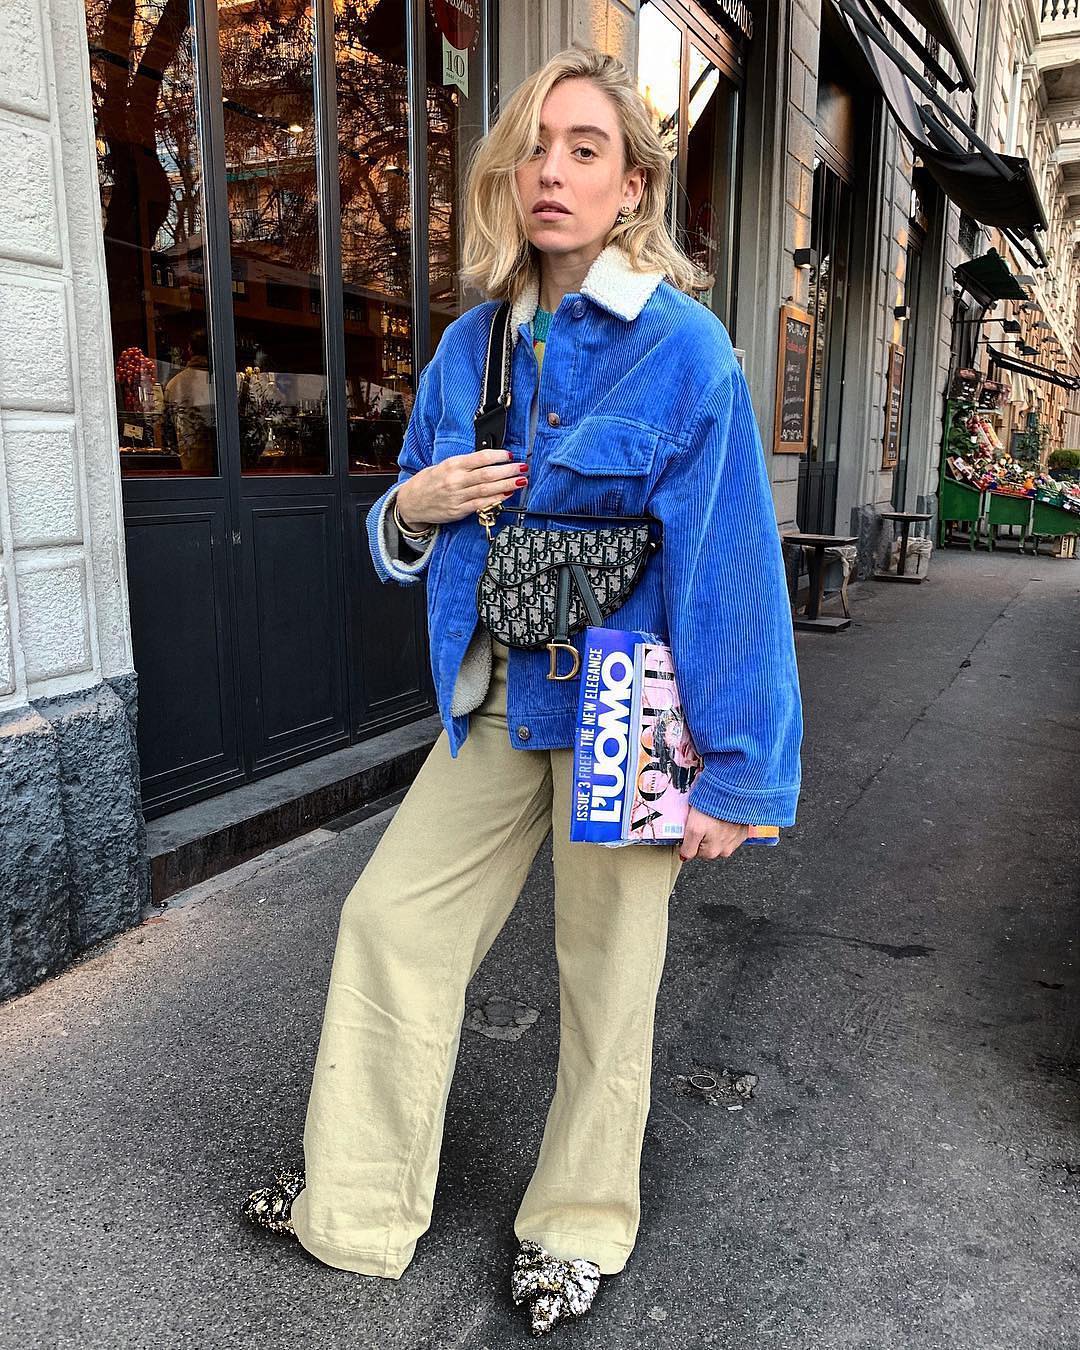 Must be seventies: Cord Blue Jacket And Wide Pants 2021